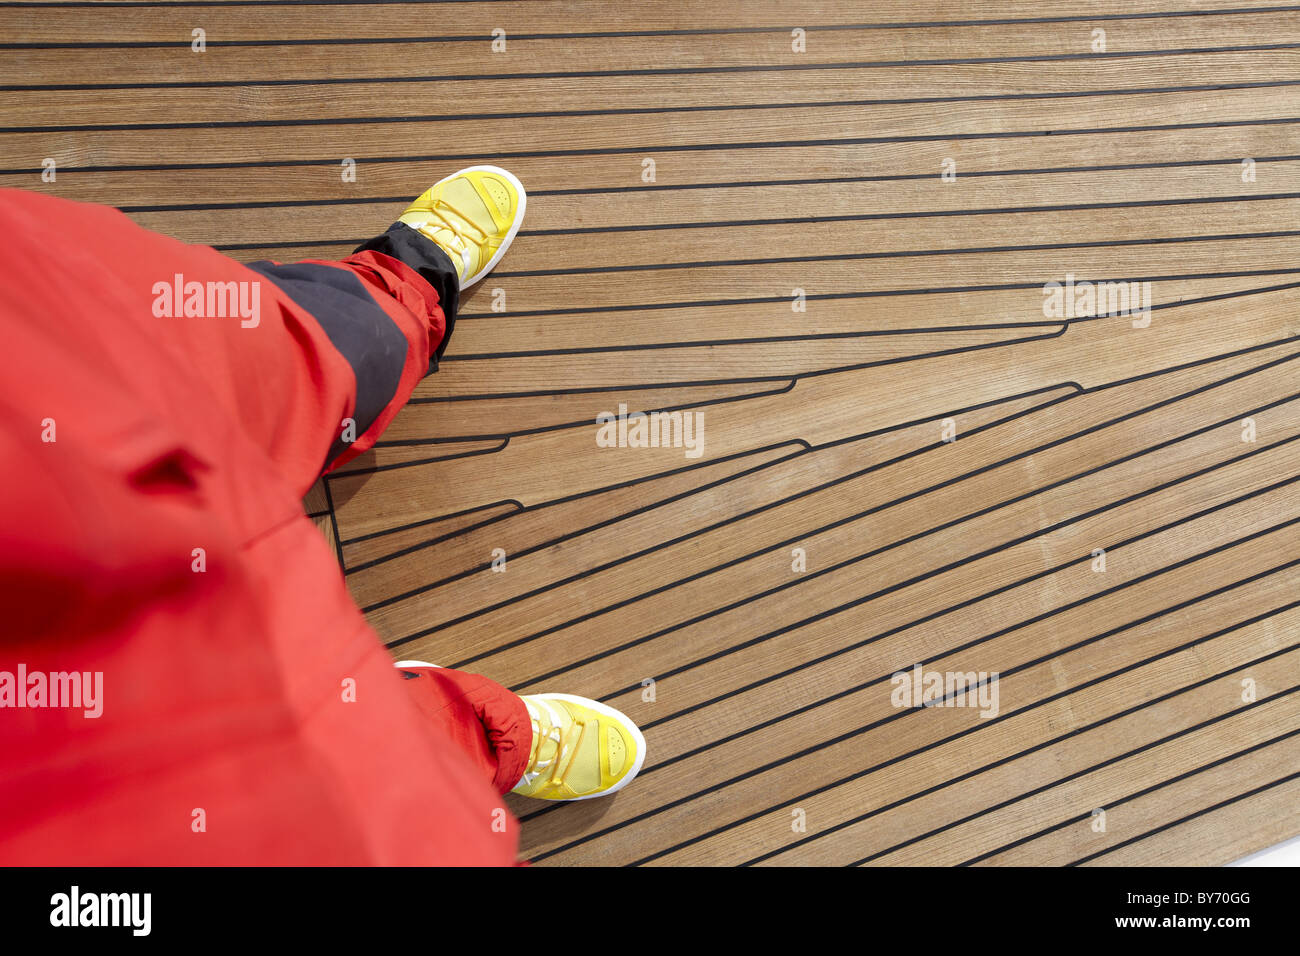 Sailing Shoes High Resolution Stock Photography and Images - Alamy